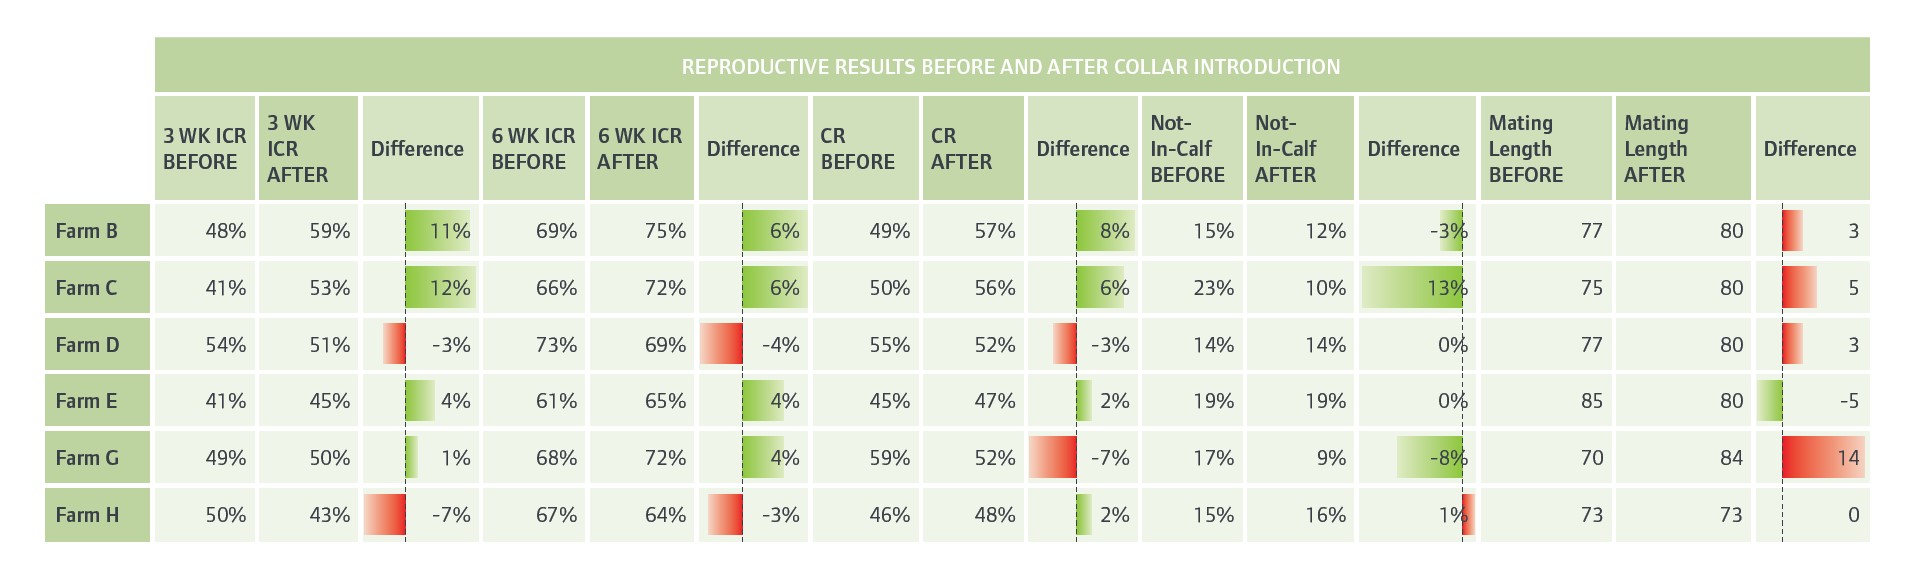 Repro results for Vetlife clients in 2021-2022